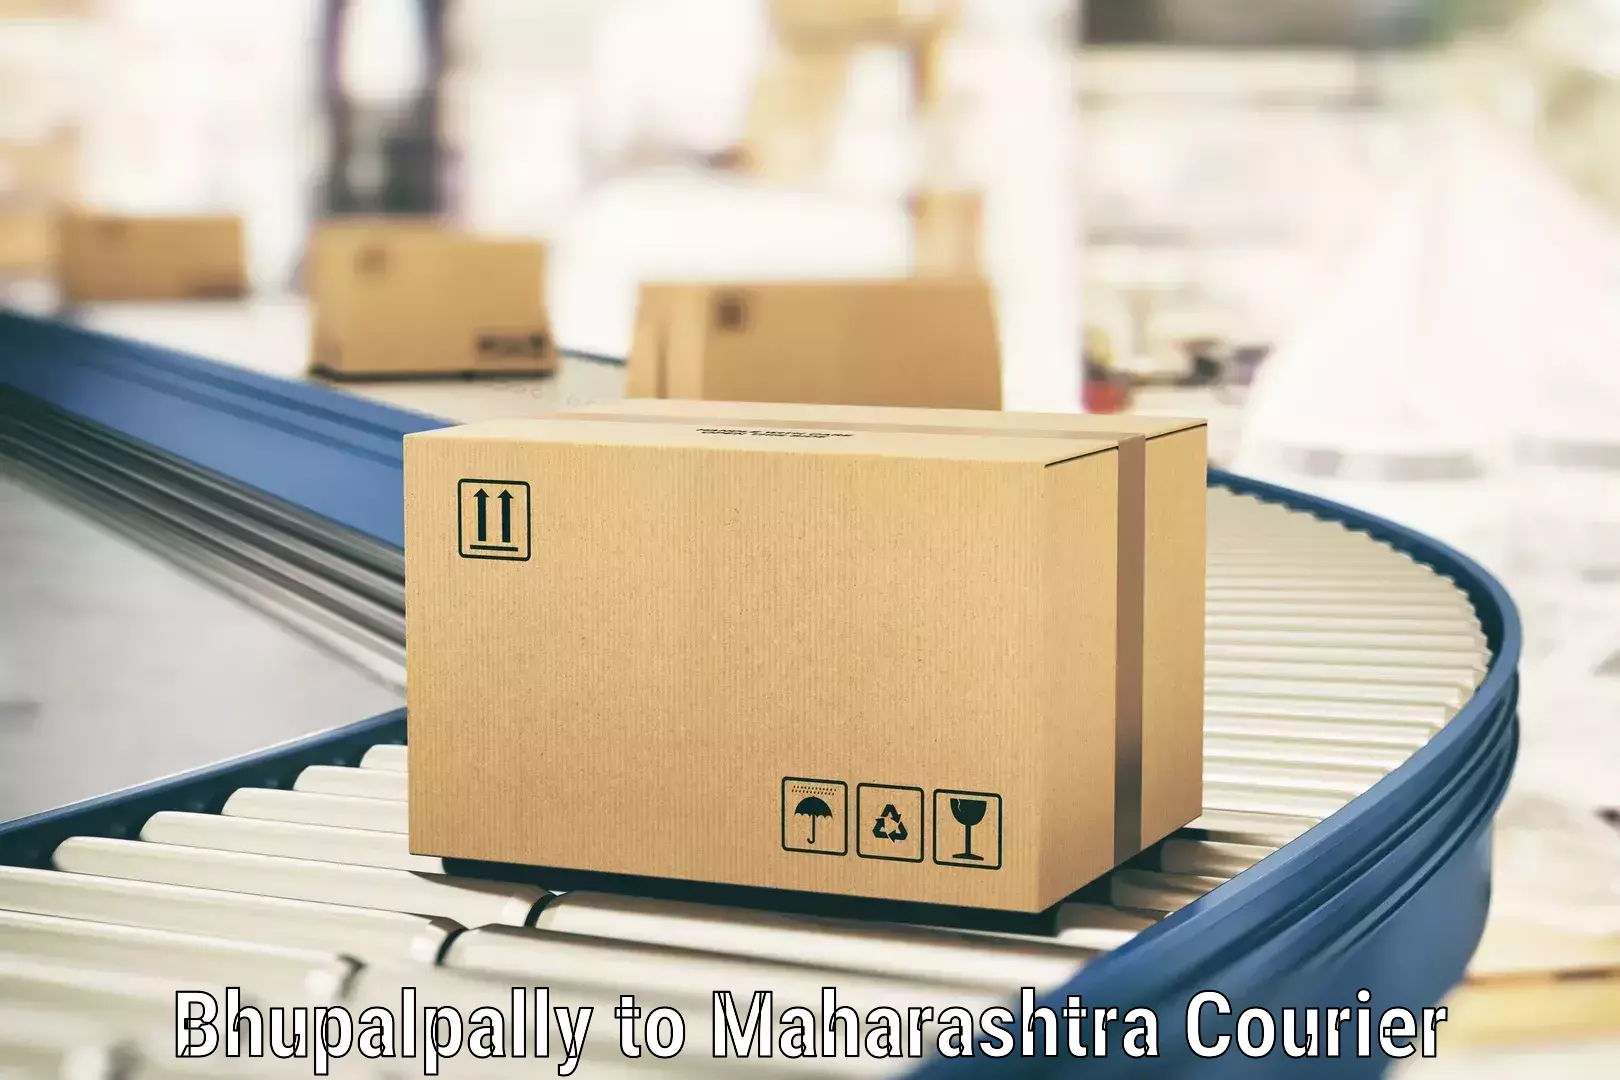 Nationwide parcel services Bhupalpally to Dharmabad